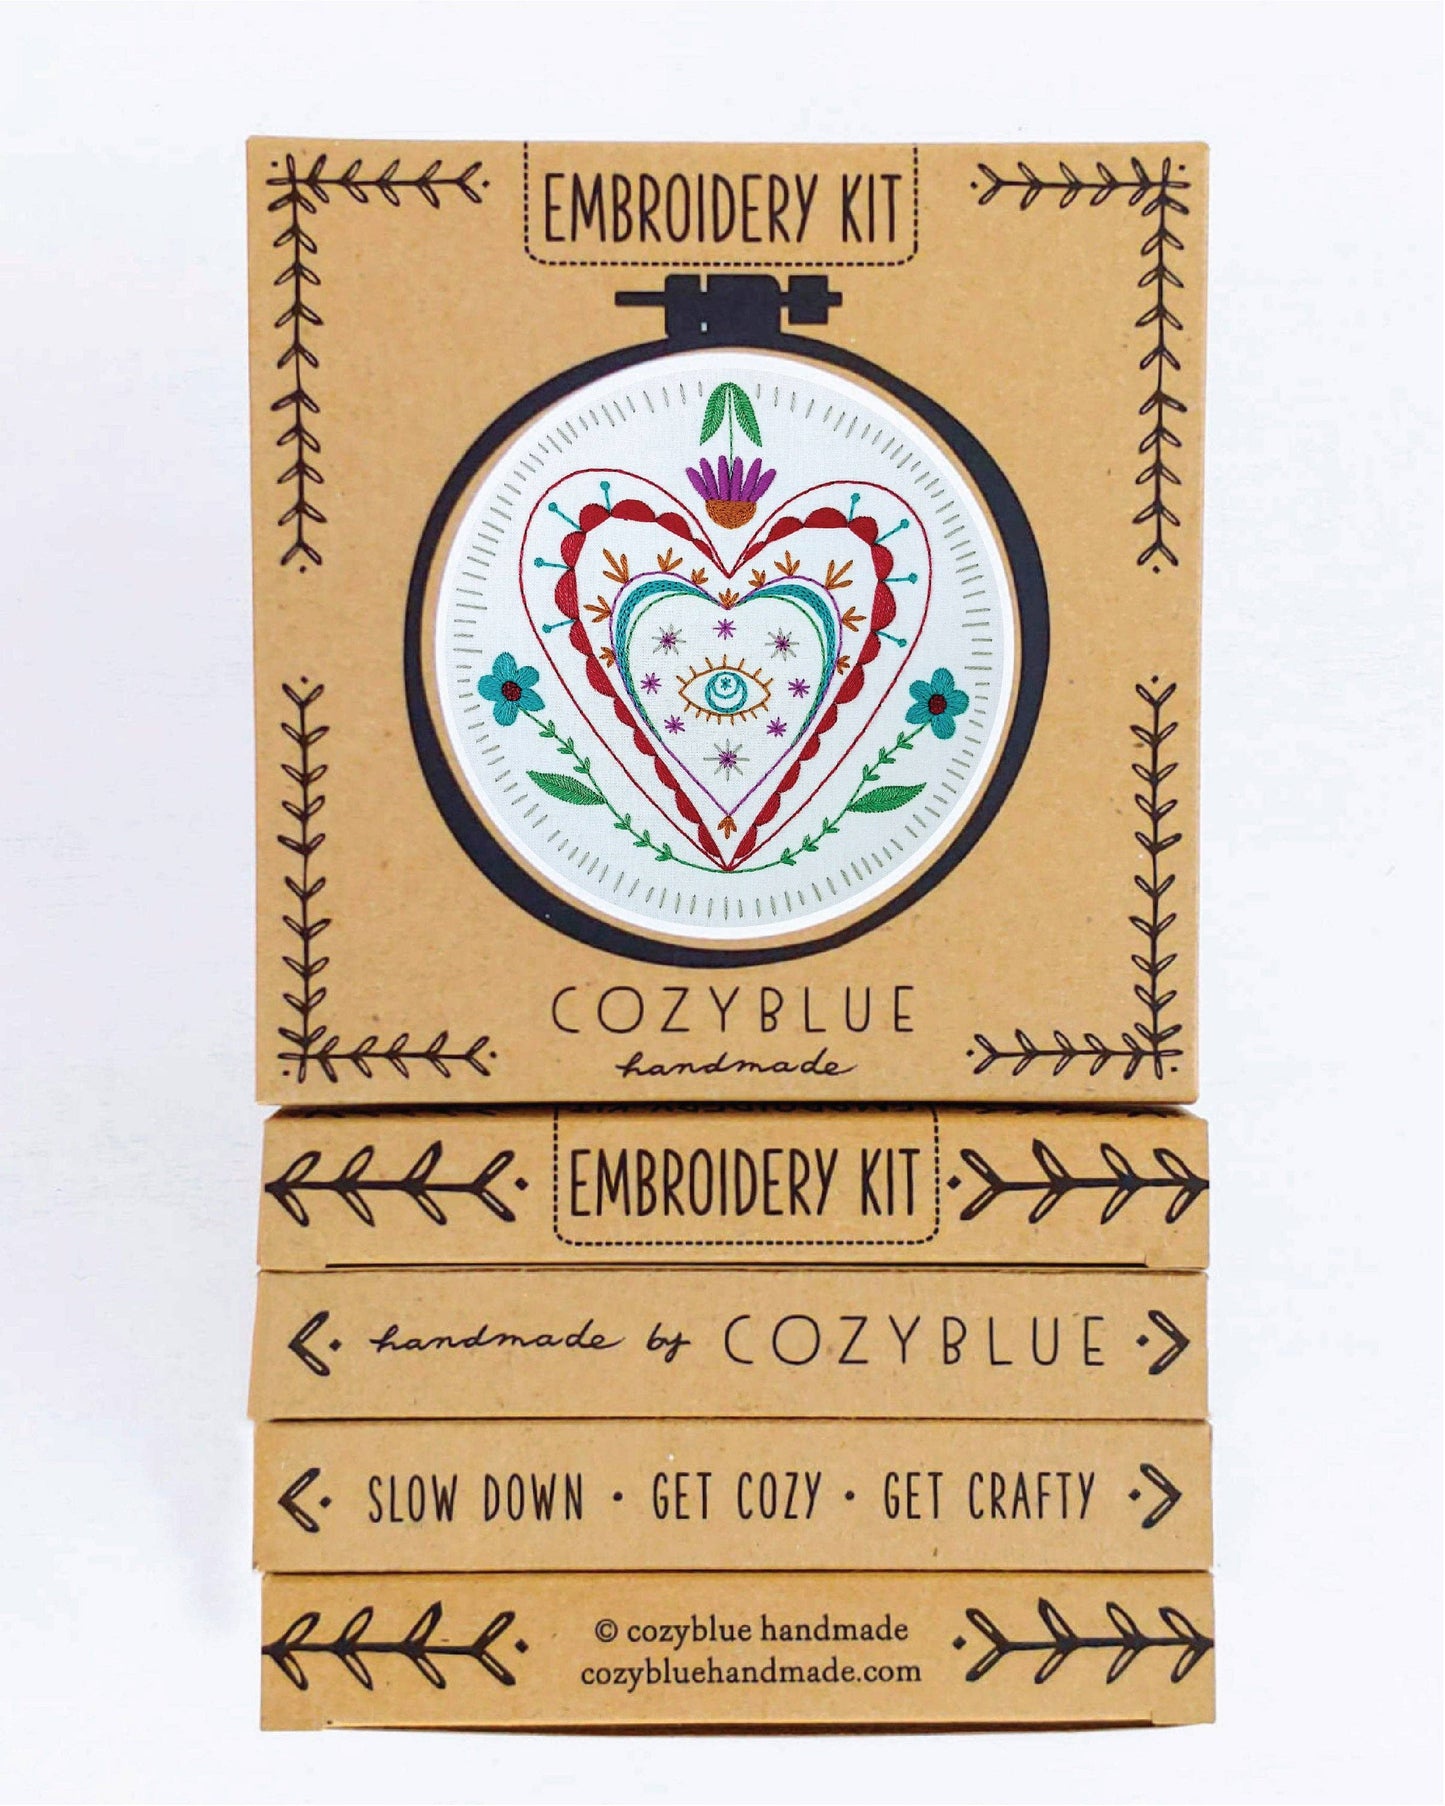 Envision - Cozyblue Handmade Embroidery Kit